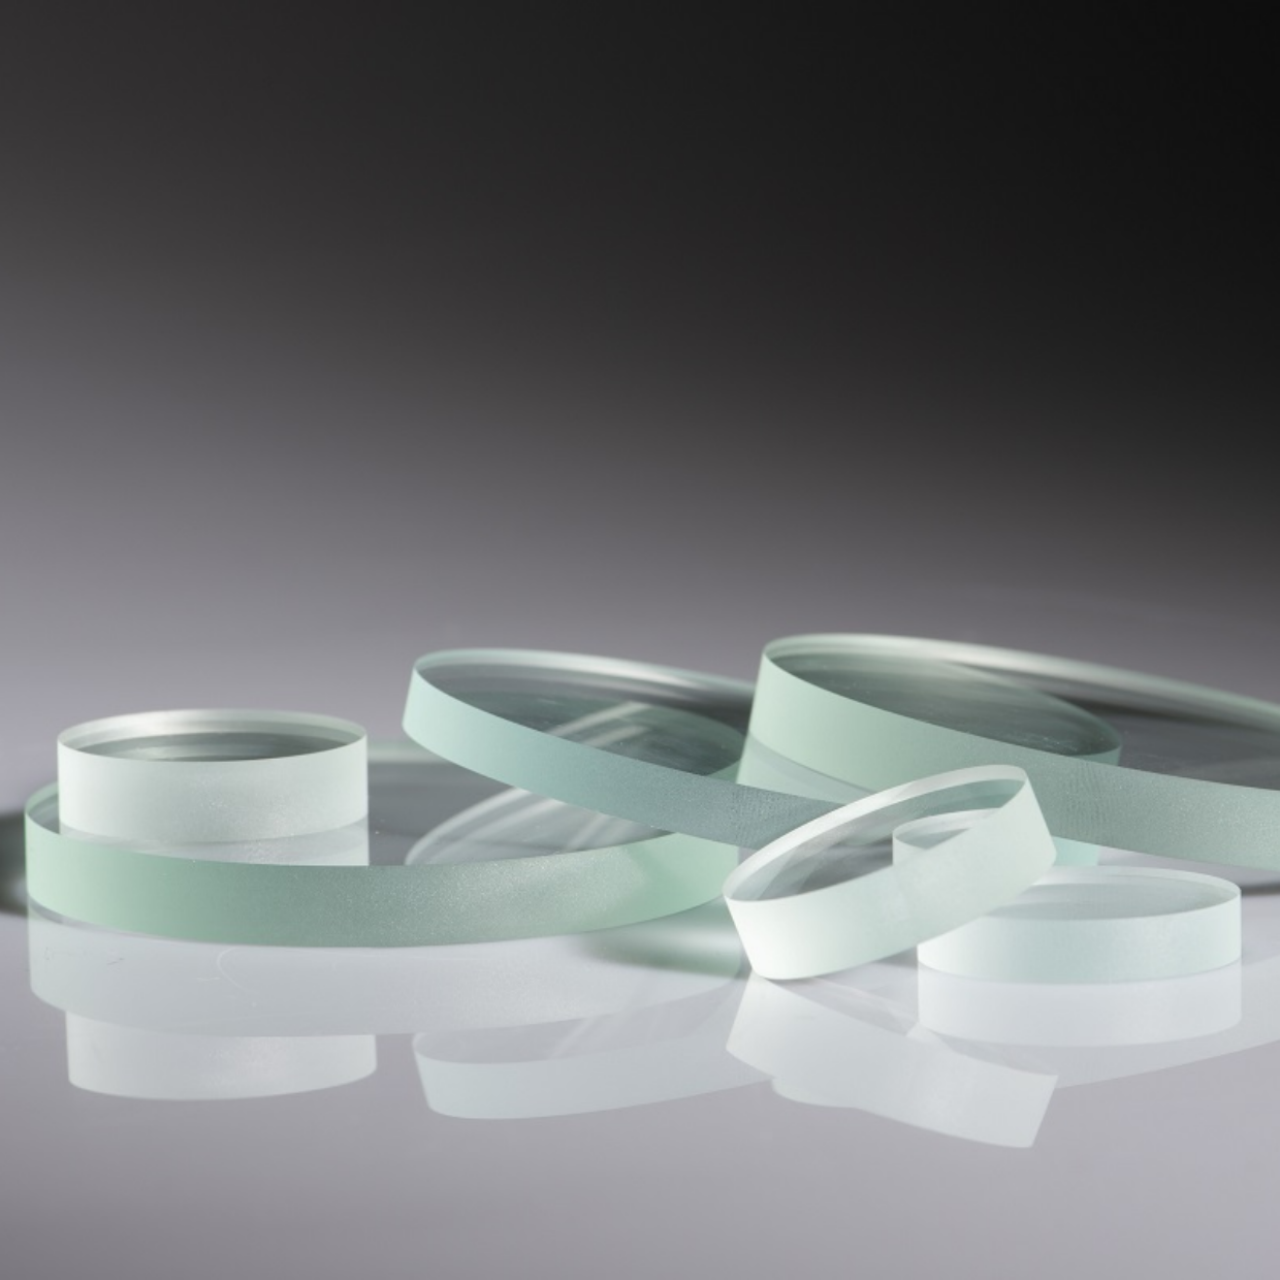 Corning’s technology can cut chunky glass up to 10mm in thickness.